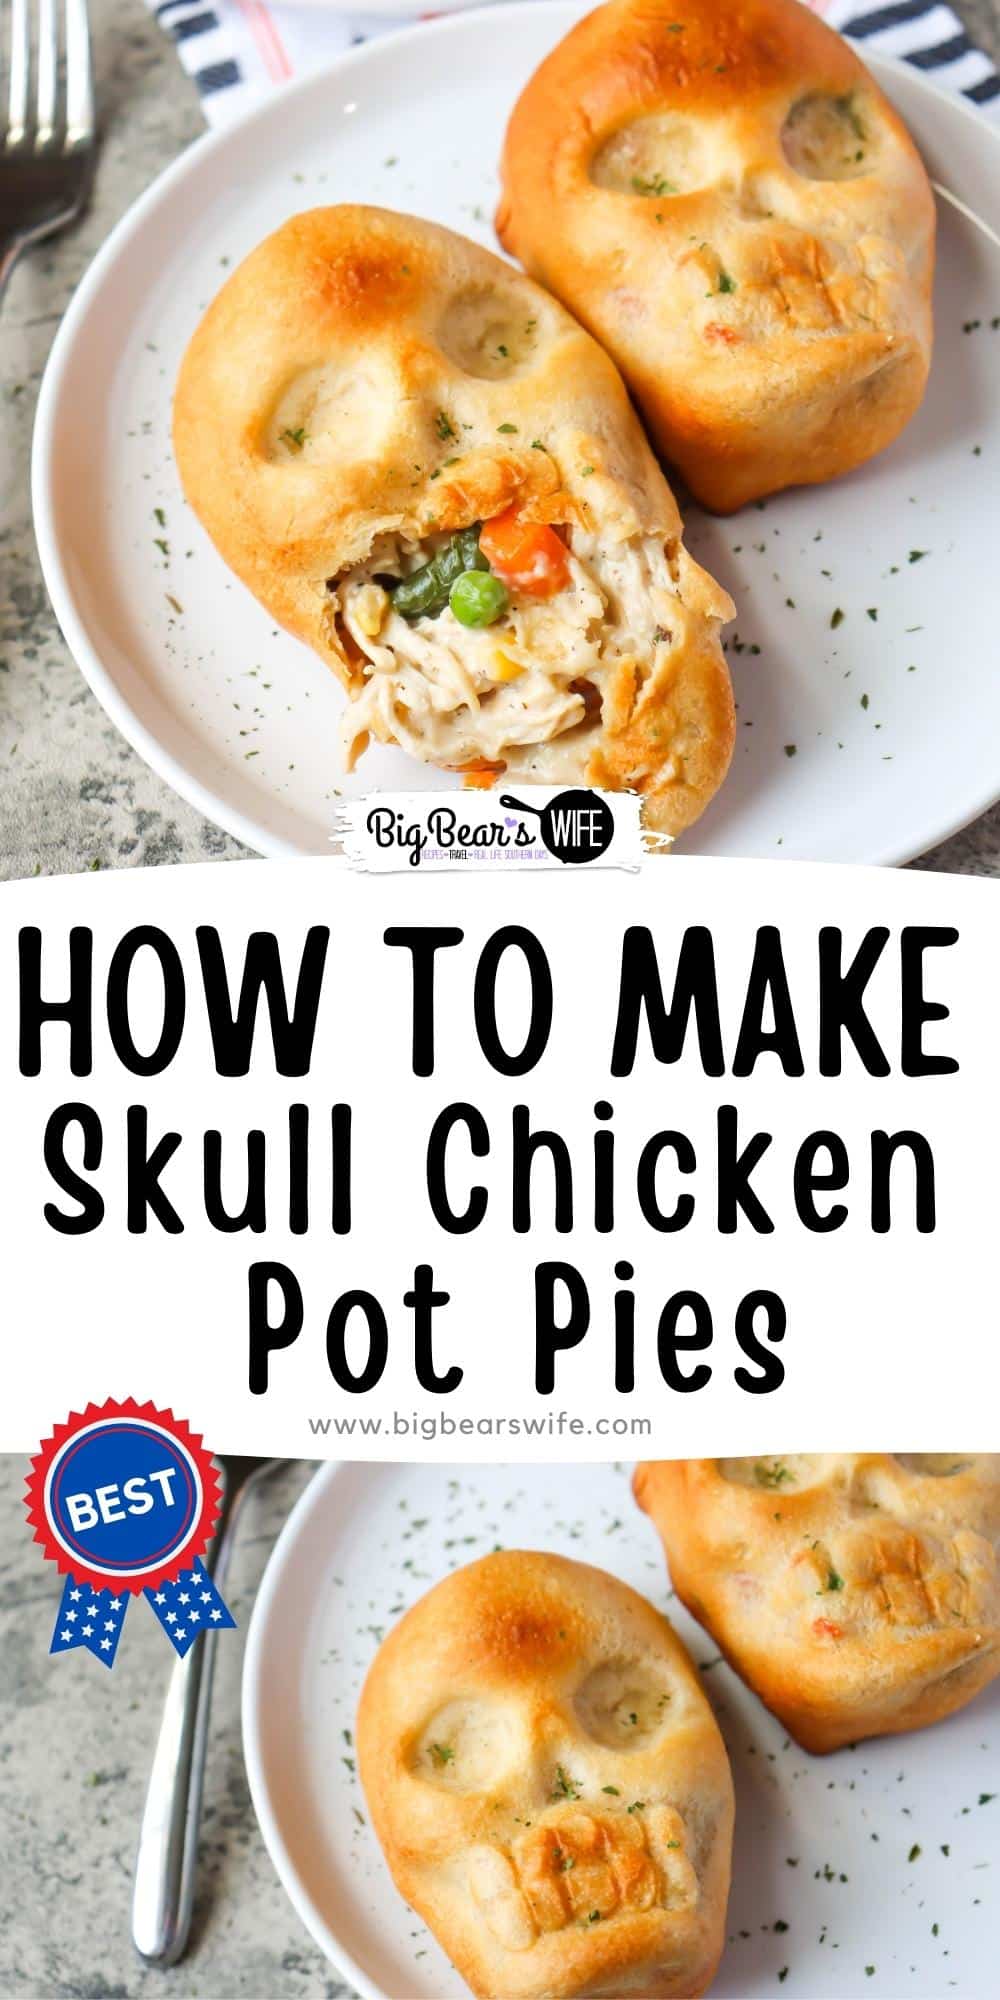 Crescent roll dough filled with an easy chicken pot pie filling, baked in a skull shaped pan makes the perfect dinner for Halloween! Skull Chicken Pot Pies are a perfect spooky addition to the dinner table.  via @bigbearswife